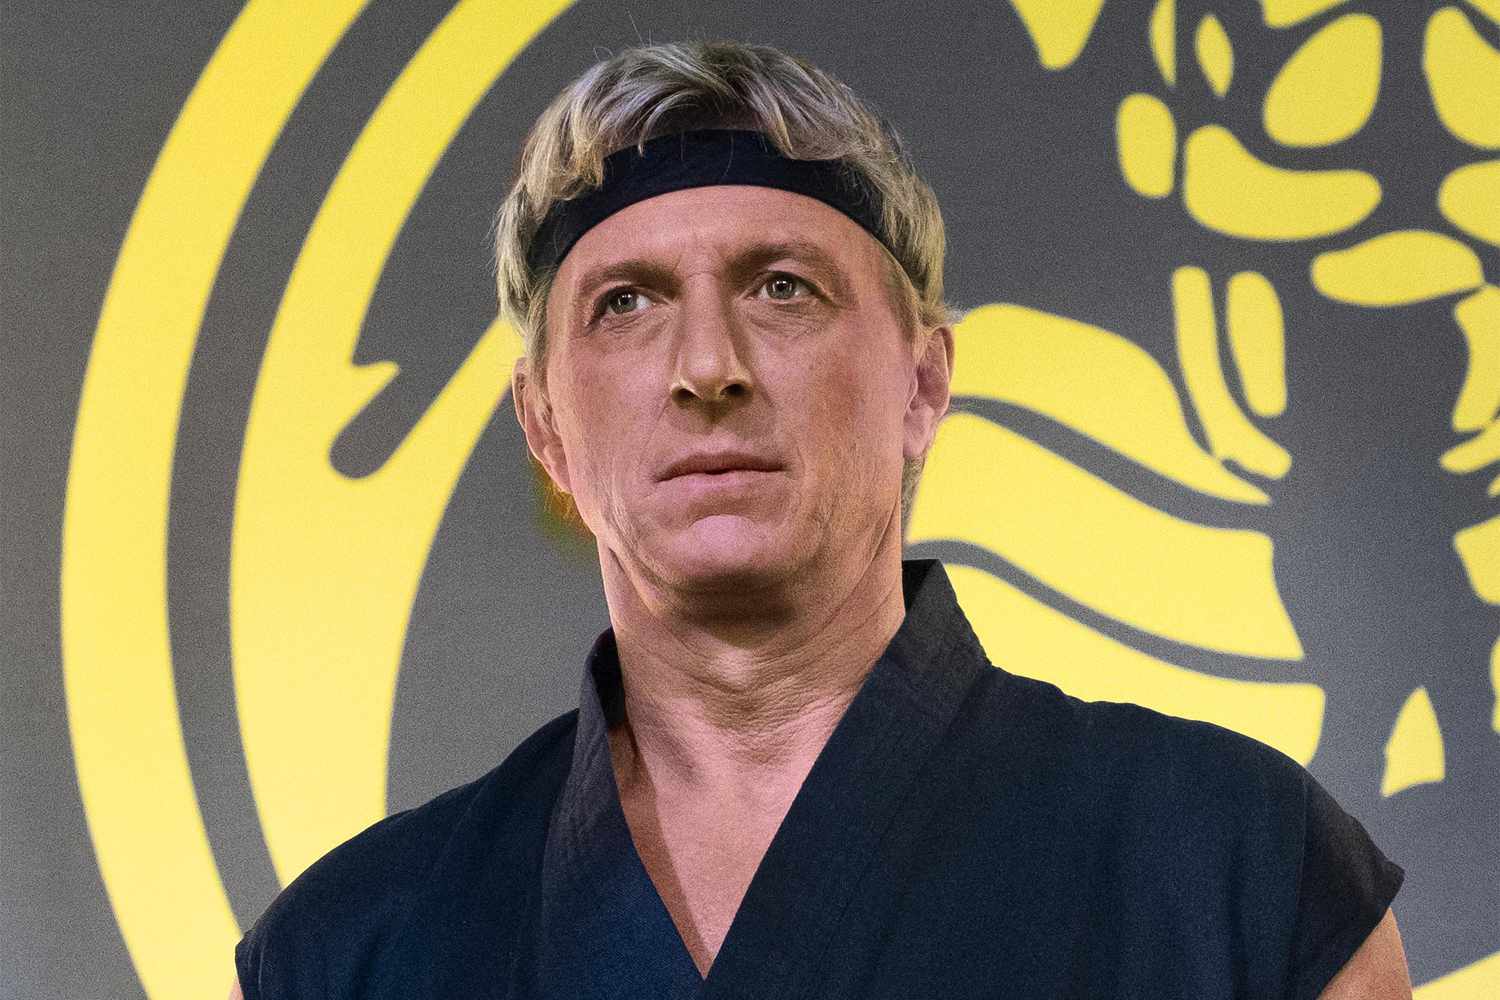 Cobra Kai: Johnny Lawrence's guide to life